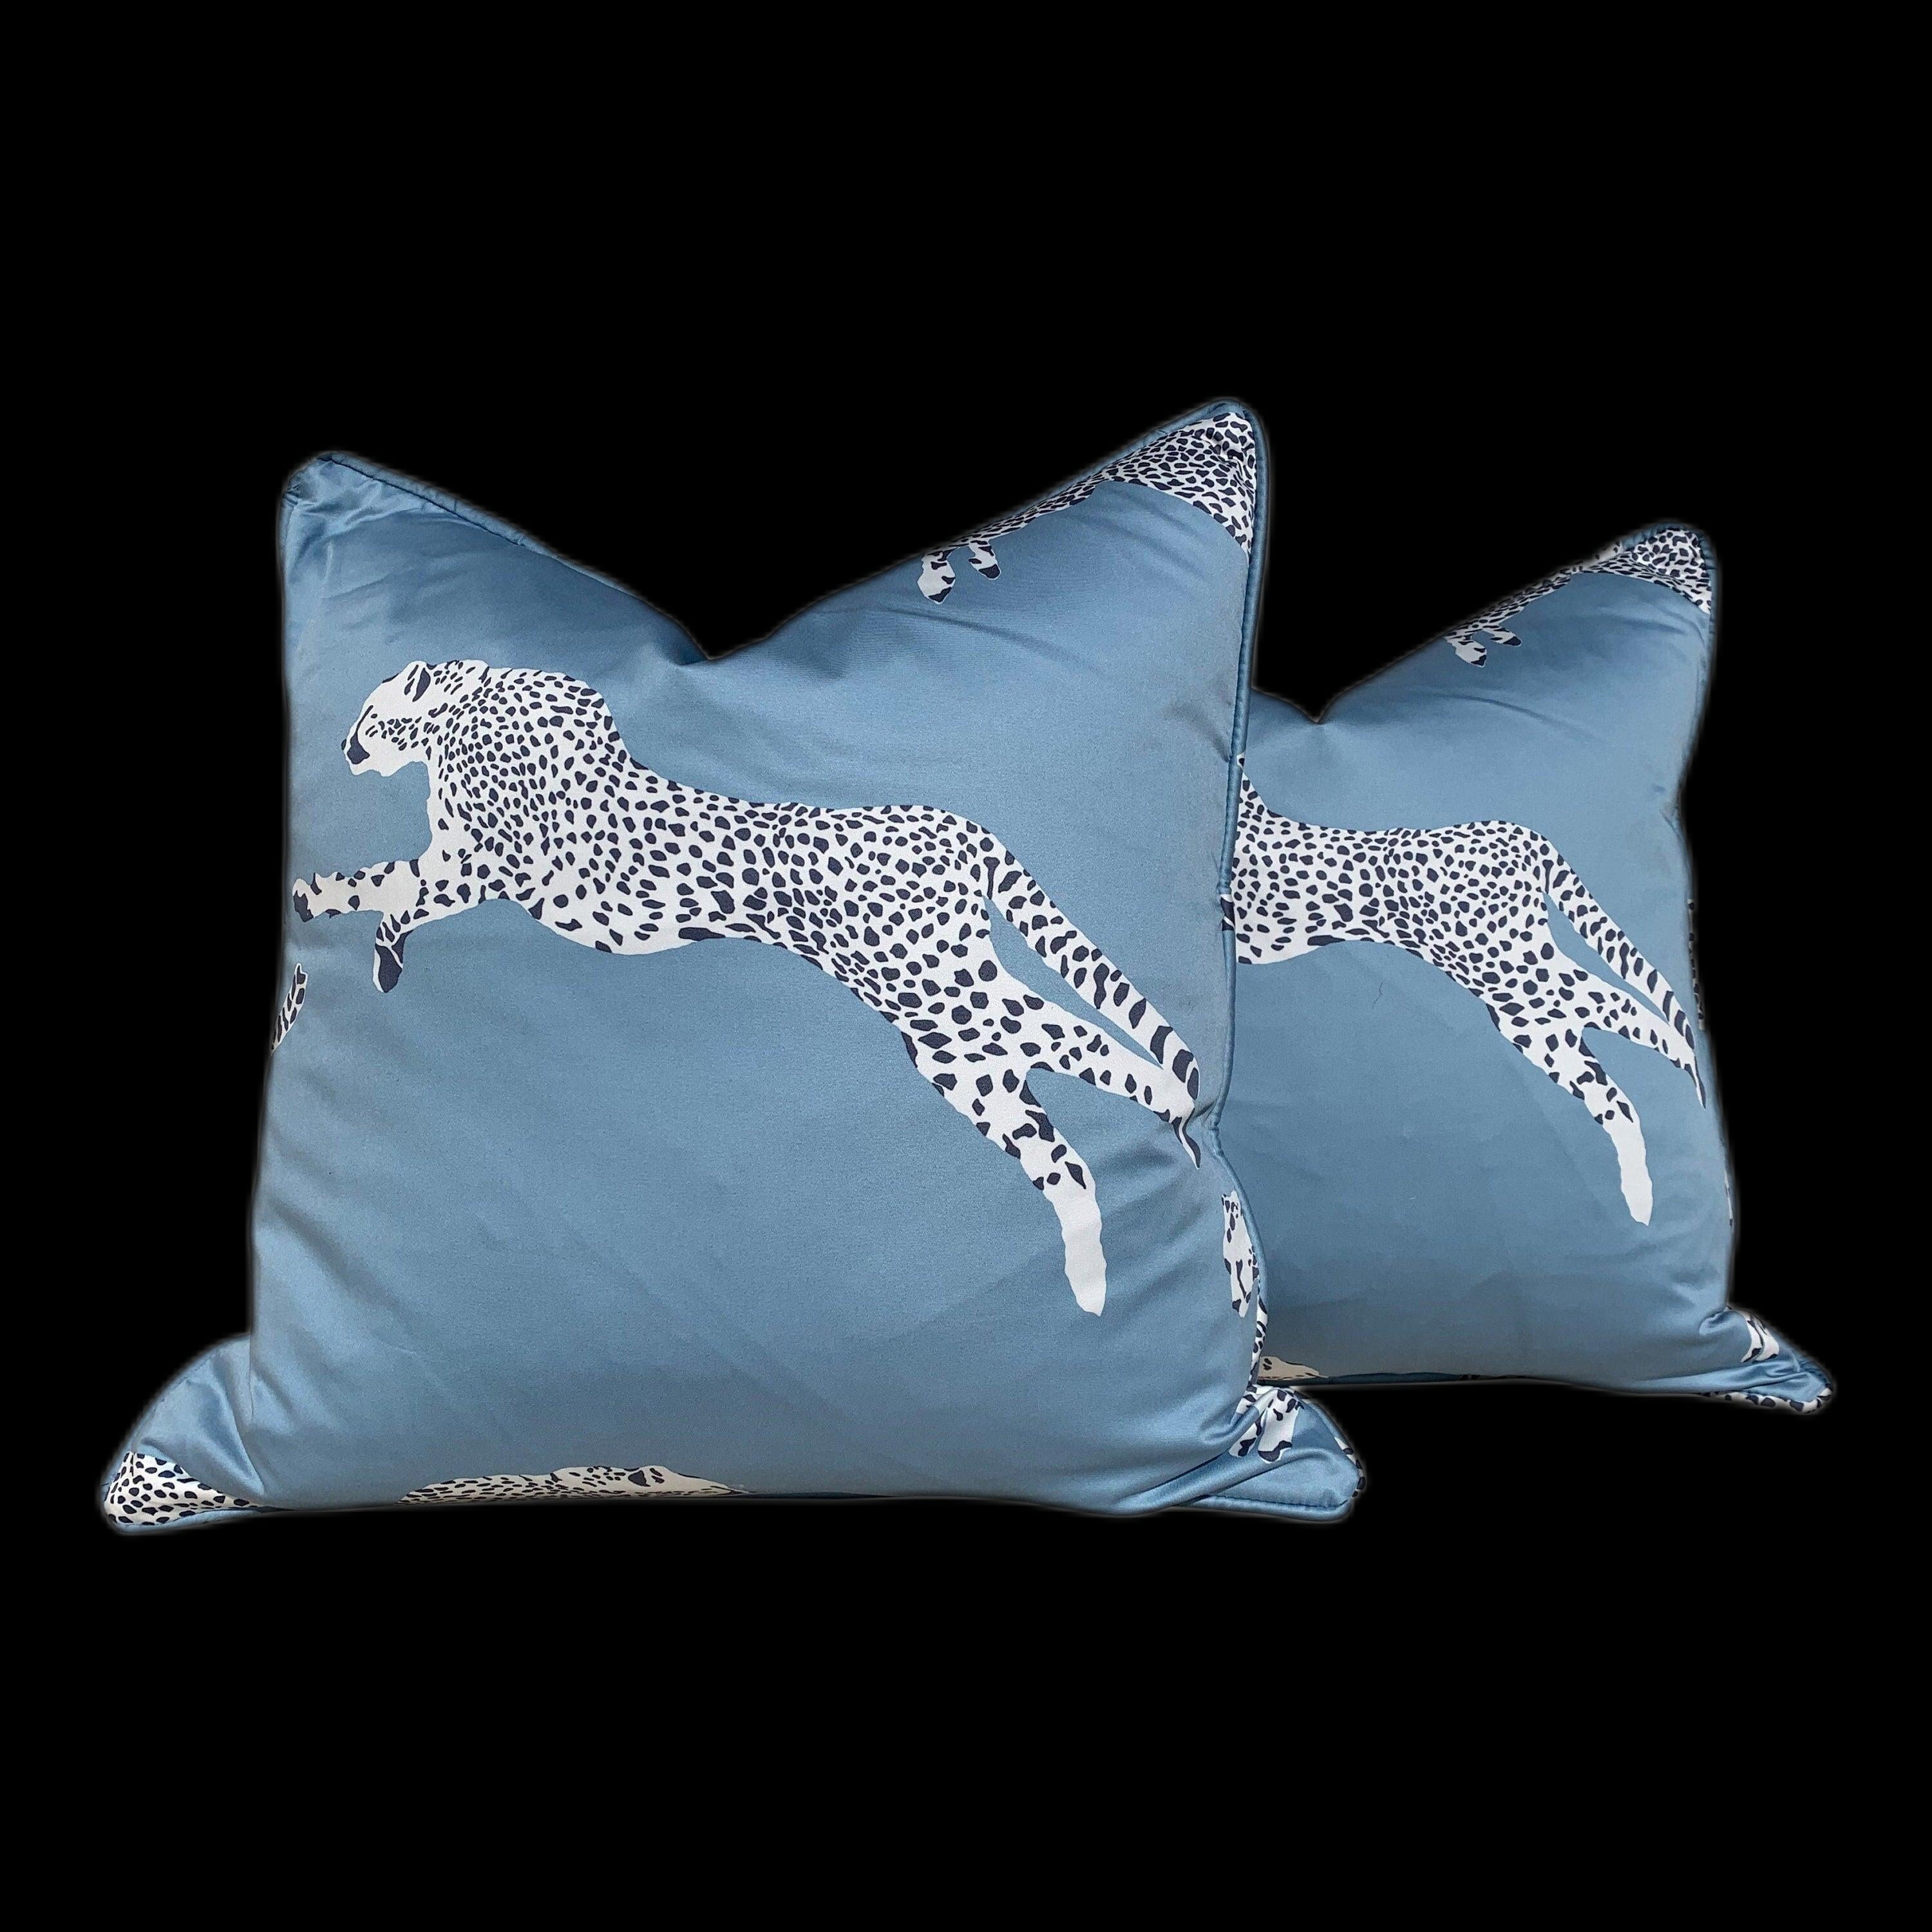 Leaping Cheetah Pillow in Blue. Lumbar Decorative Pillow Animal Print Decor, accent cushion,  high end pillow cover, exotic pillow cover